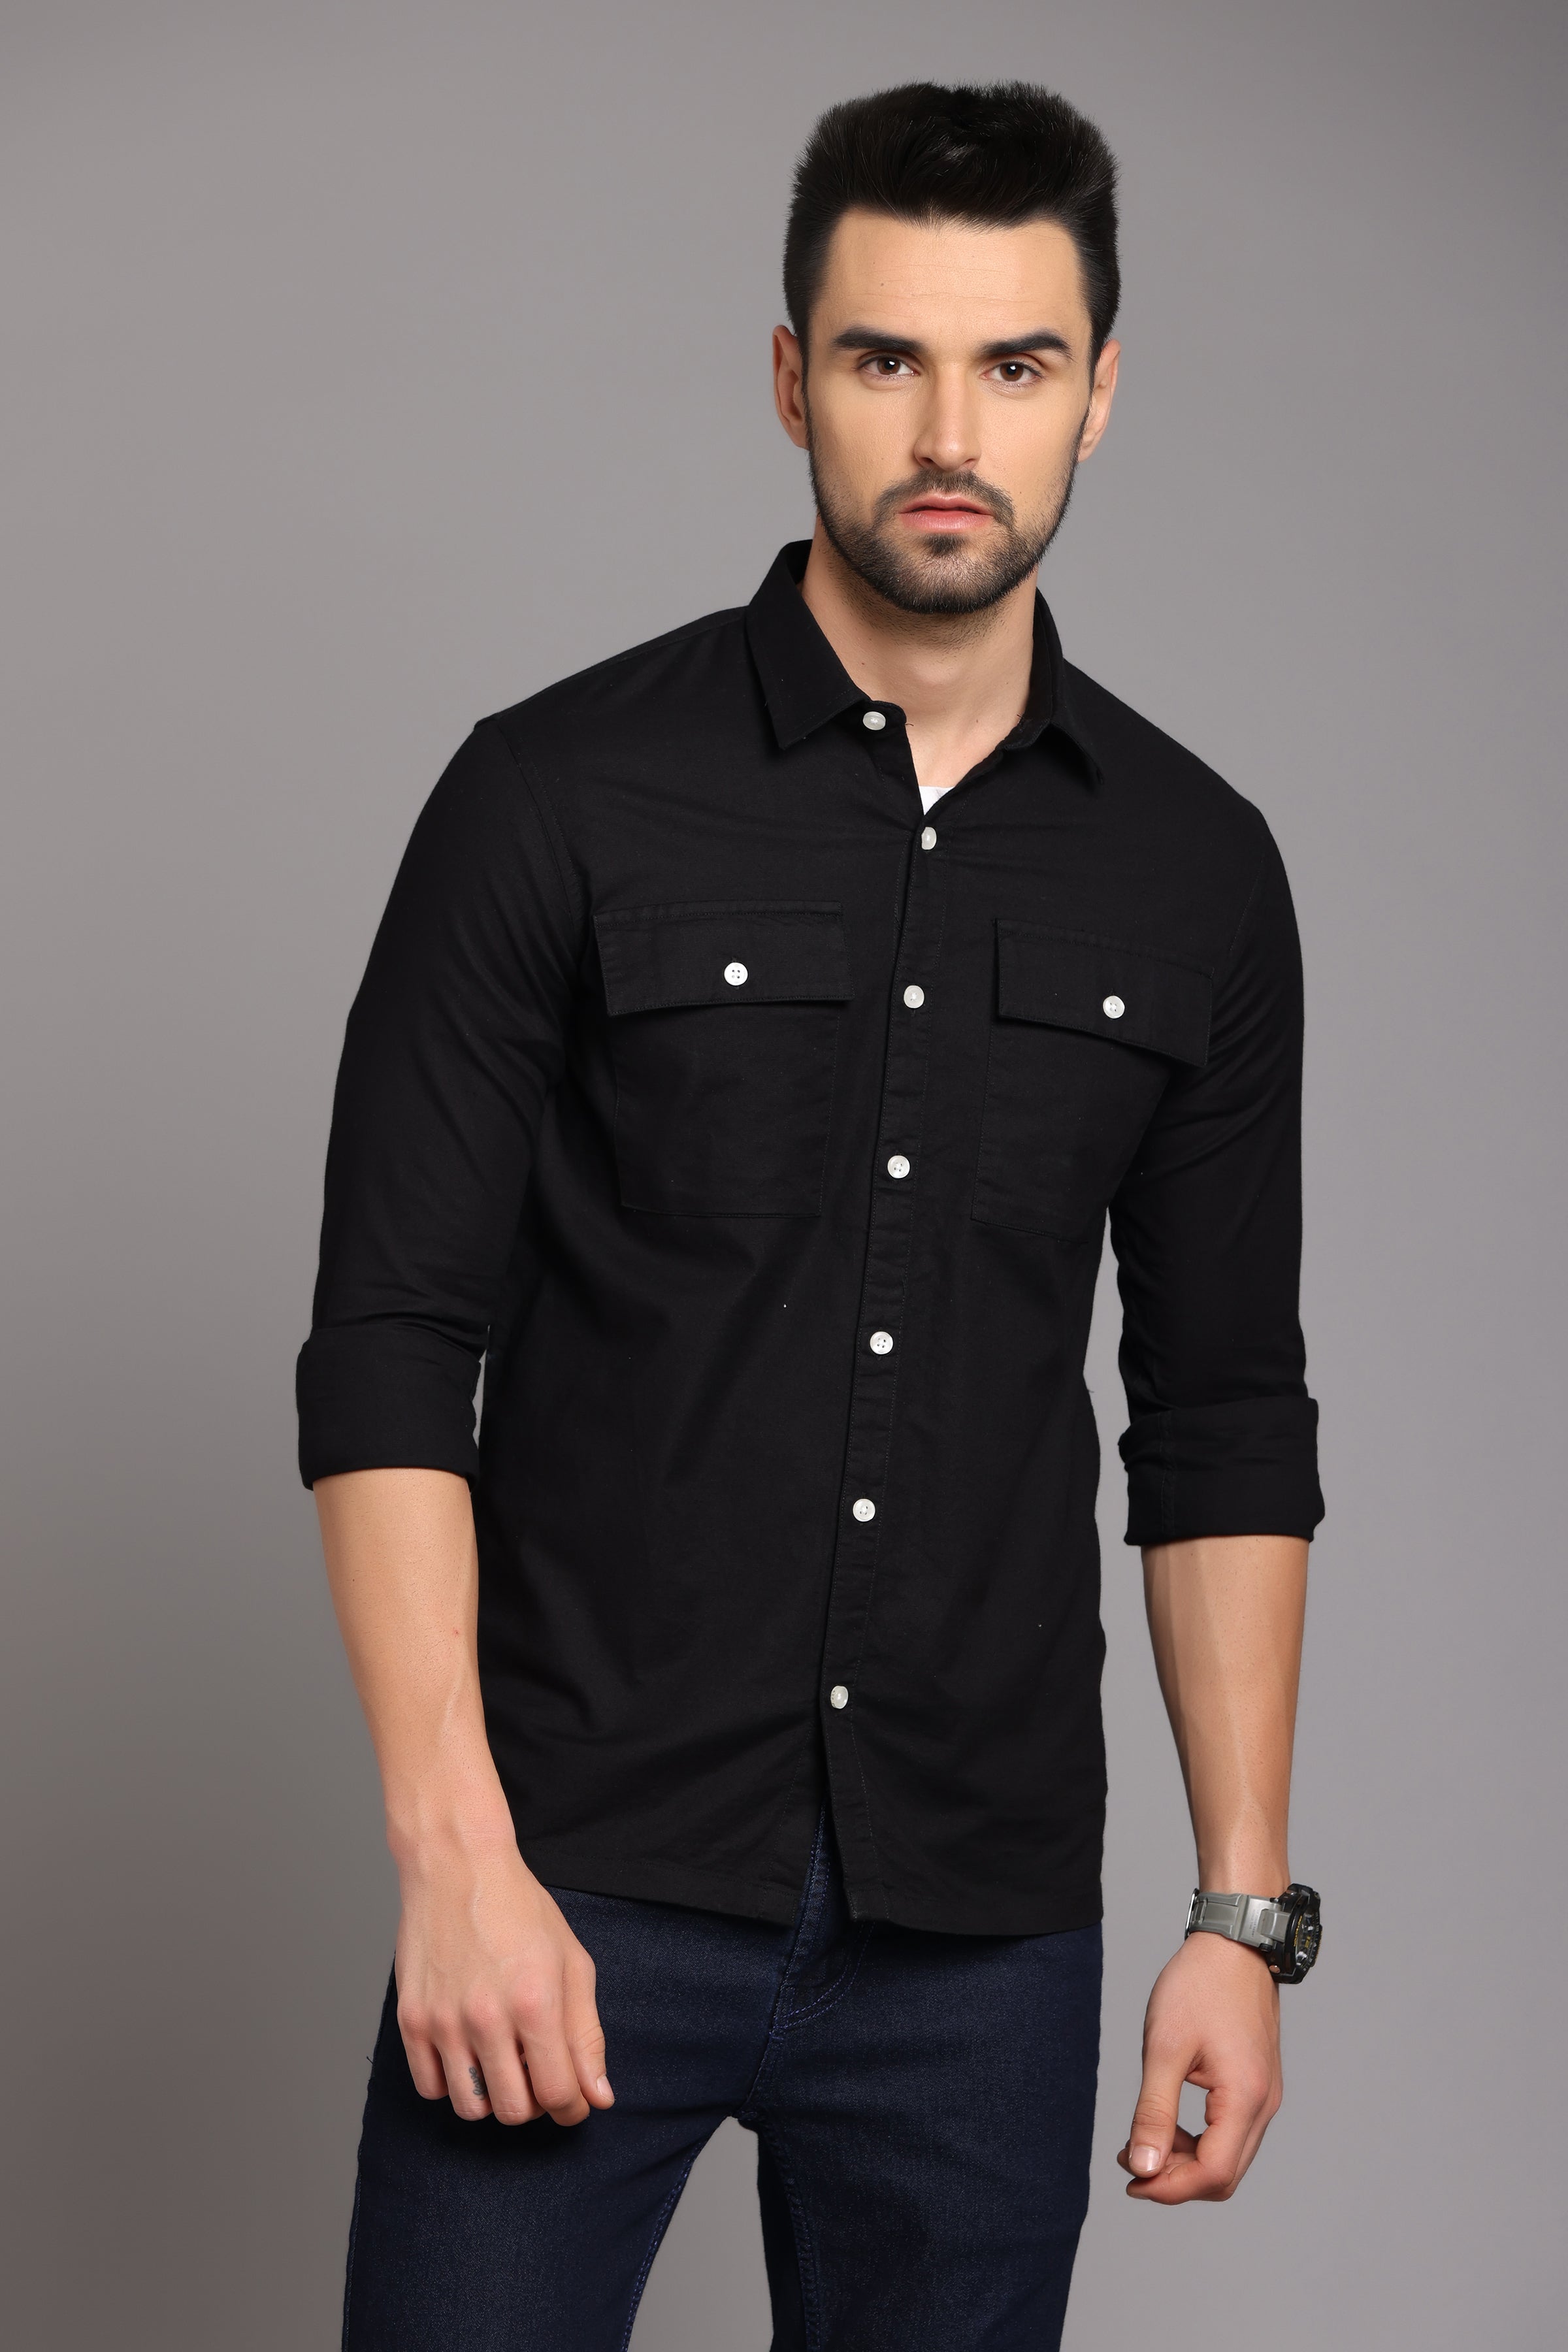 Black Full Sleeve Shirt with Double Pocket Shirts Project 30 S 